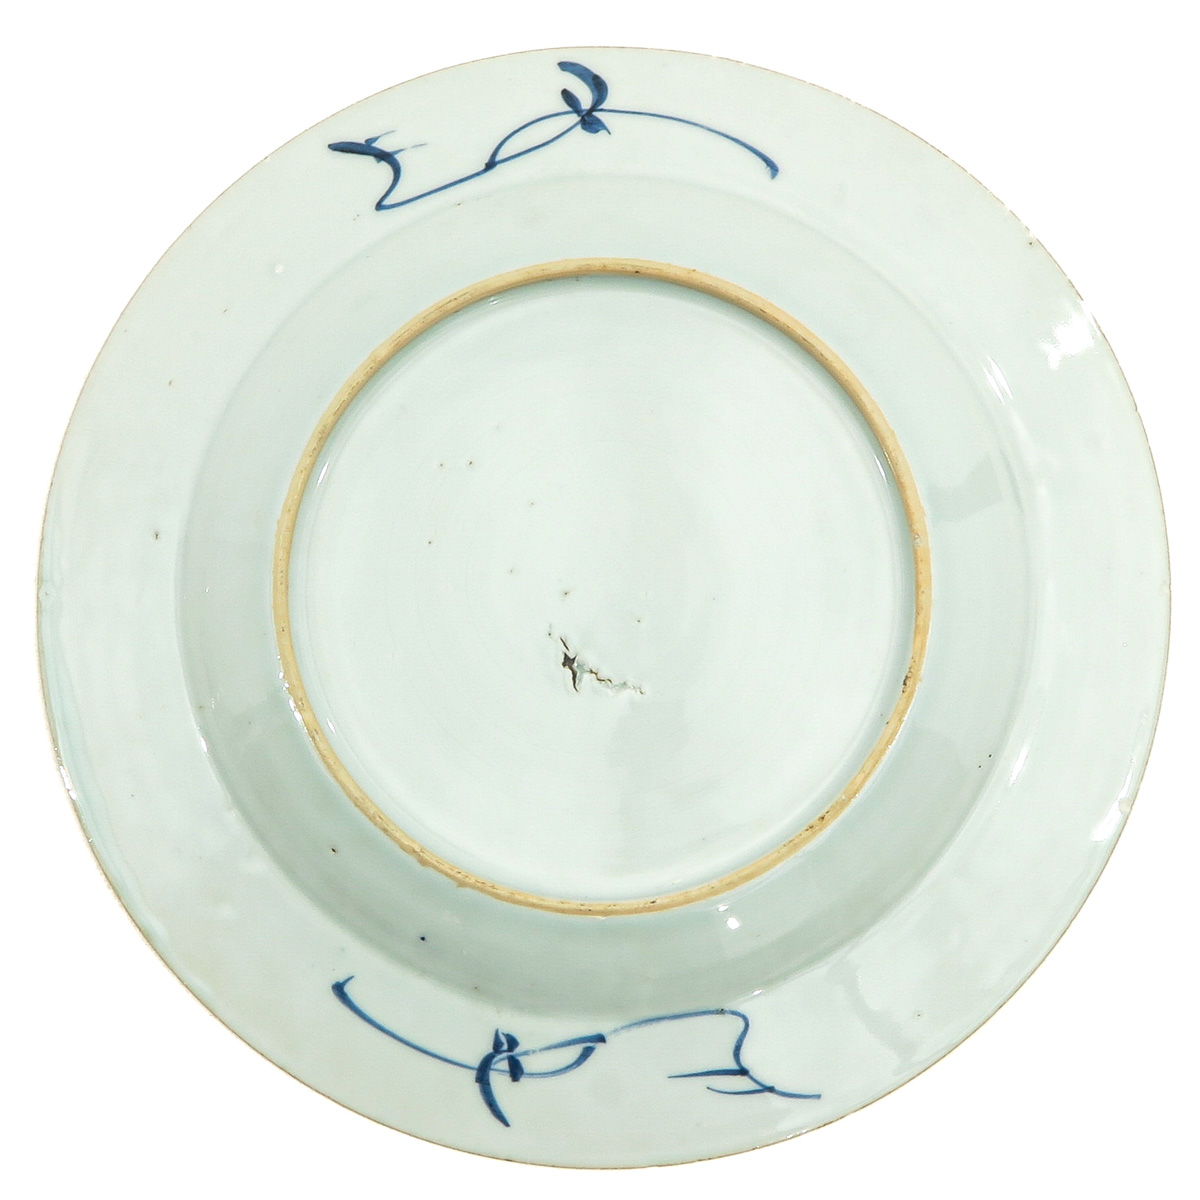 A Series of 5 Blue and White Plates - Image 8 of 10